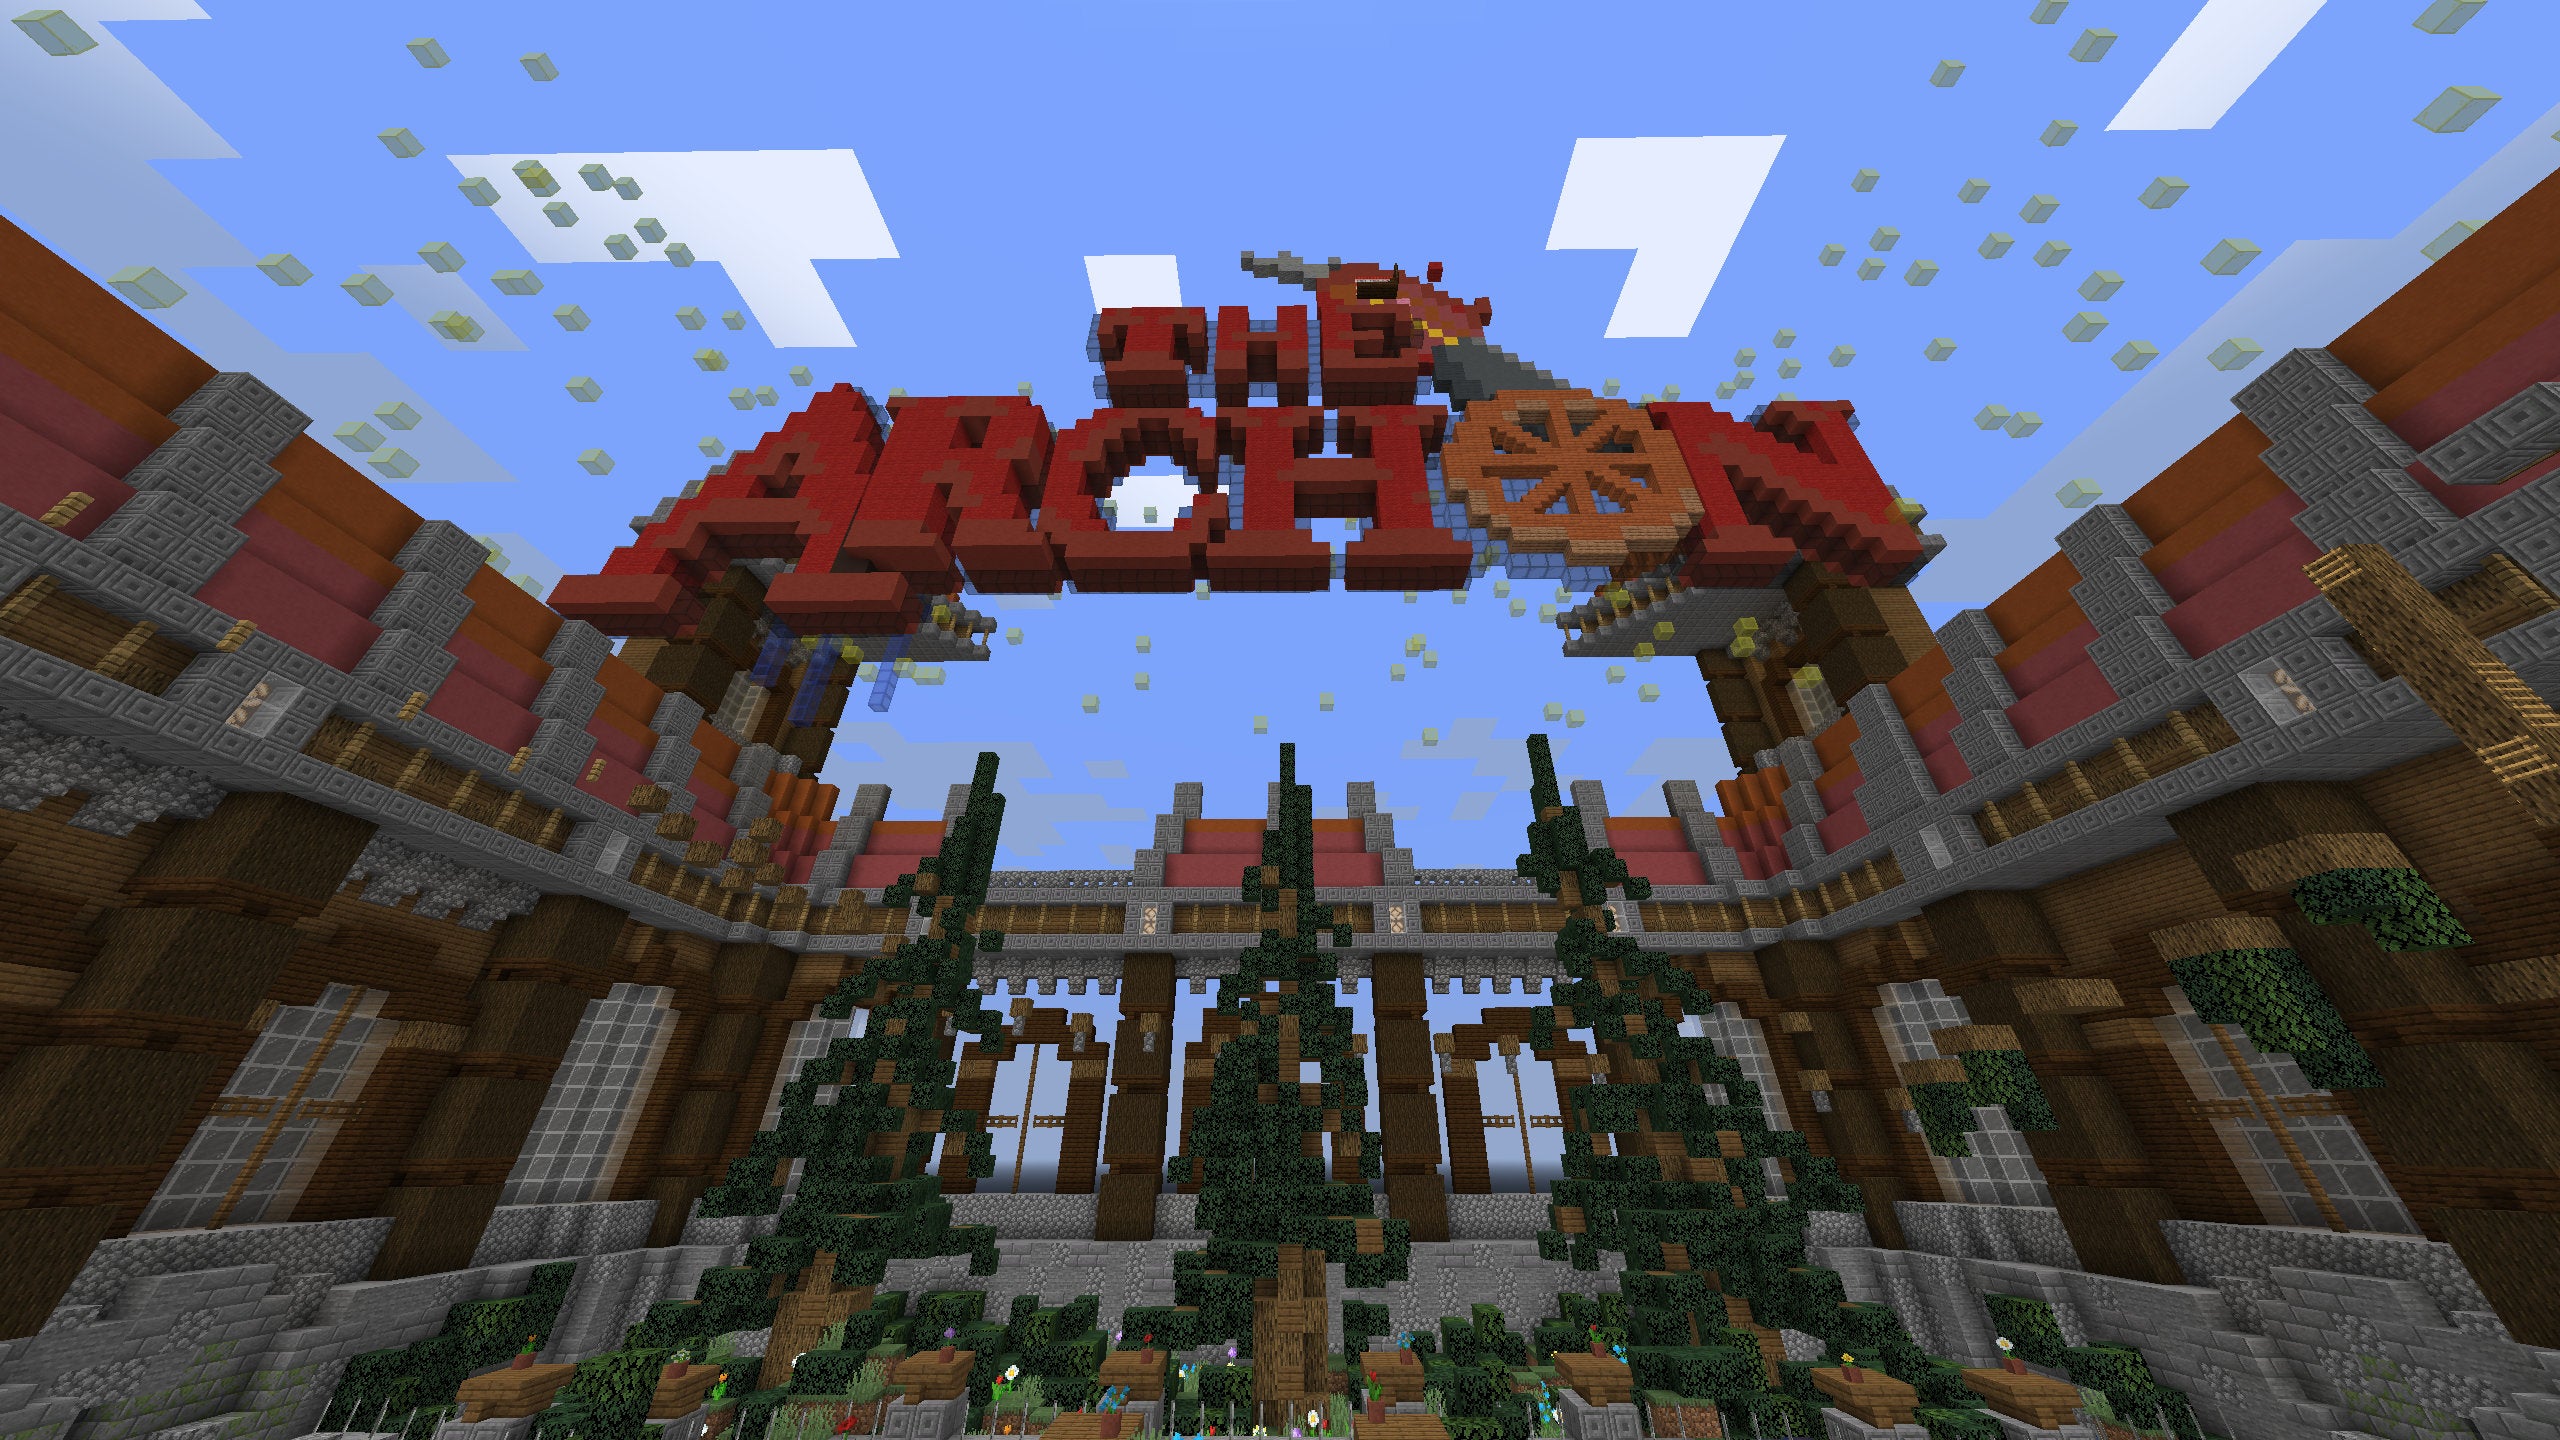 A Minecraft screenshot of the lobby of the TheArchon server.